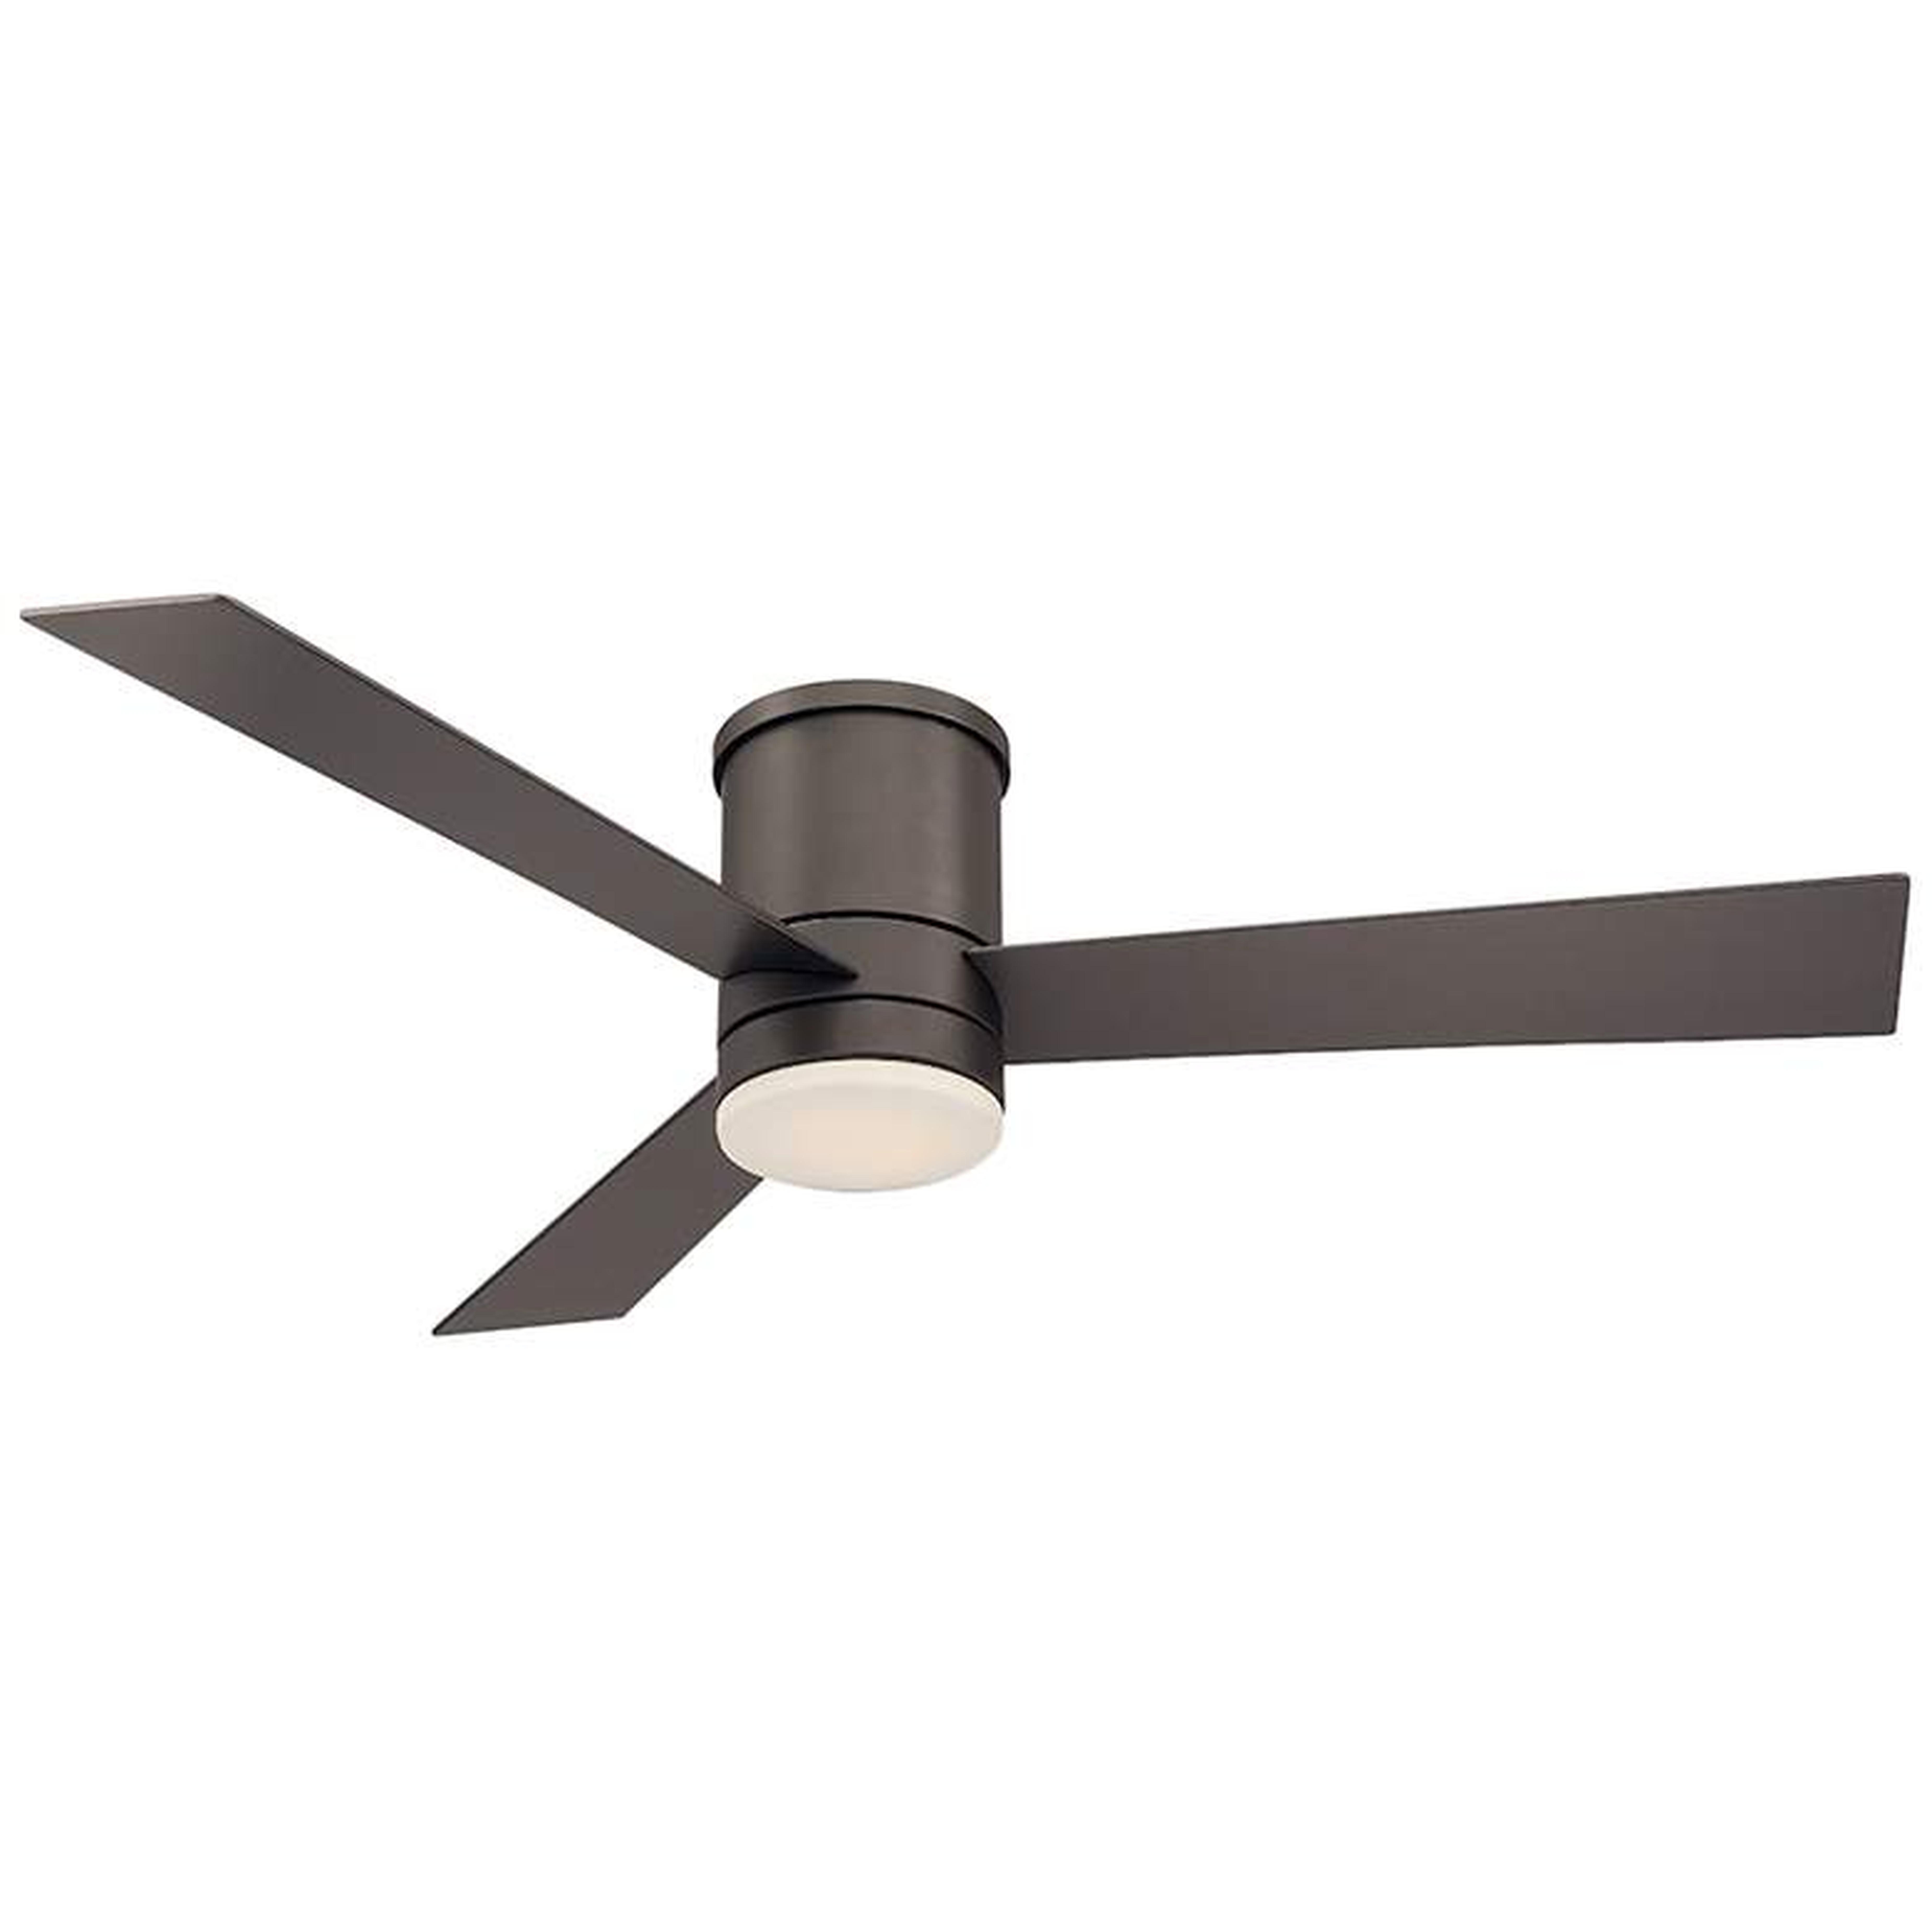 52" Modern Forms Axis Bronze LED Wet Ceiling Fan - Lamps Plus